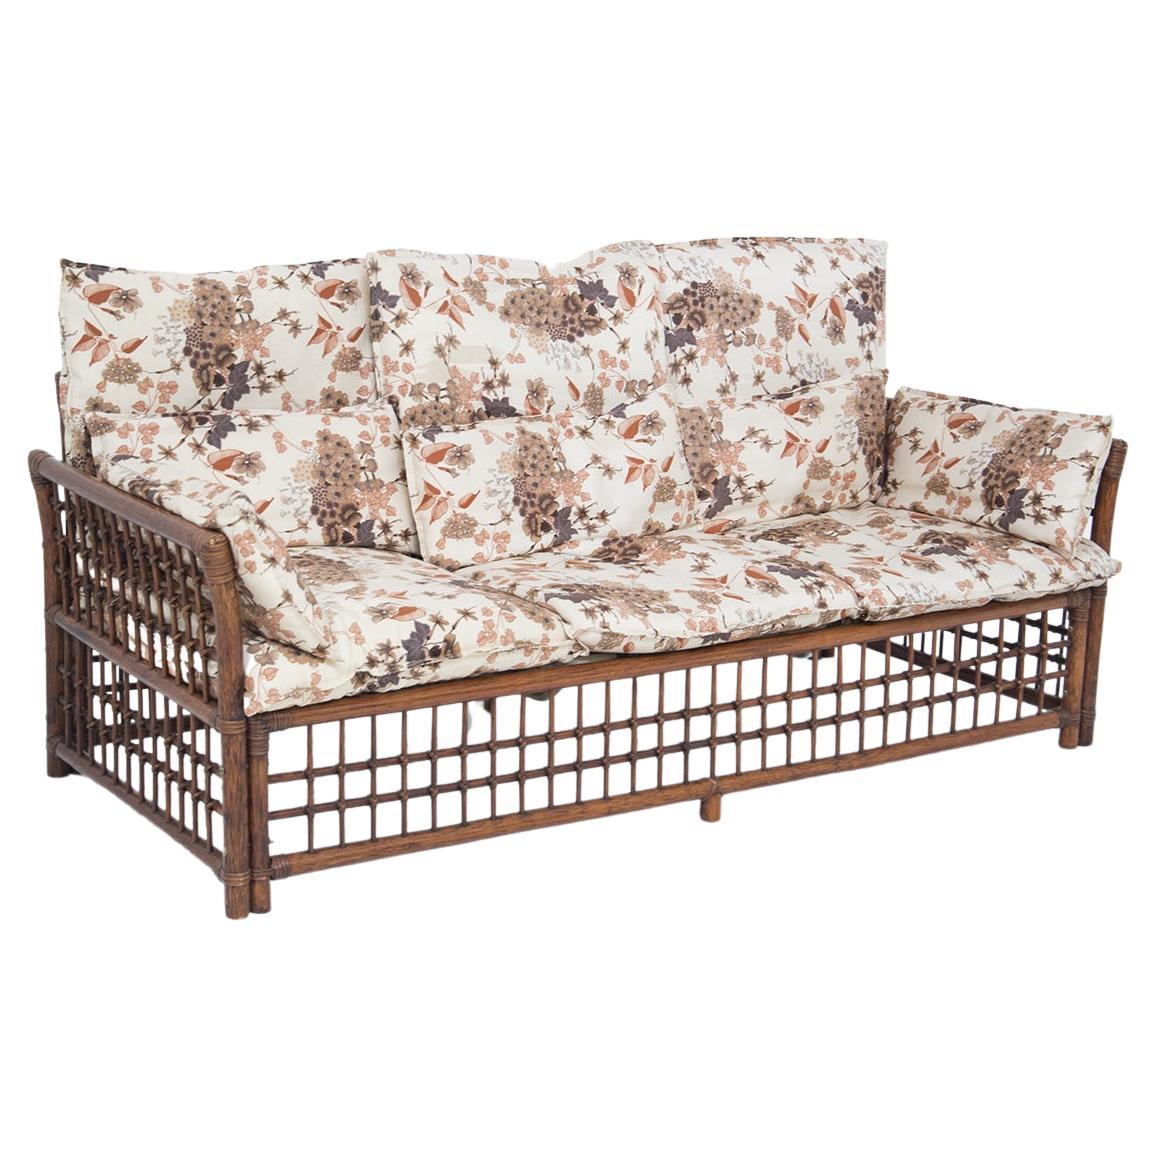 Vivai del Sud Vintage Wood and Rattan Sofa W Floral Fabric For Sale